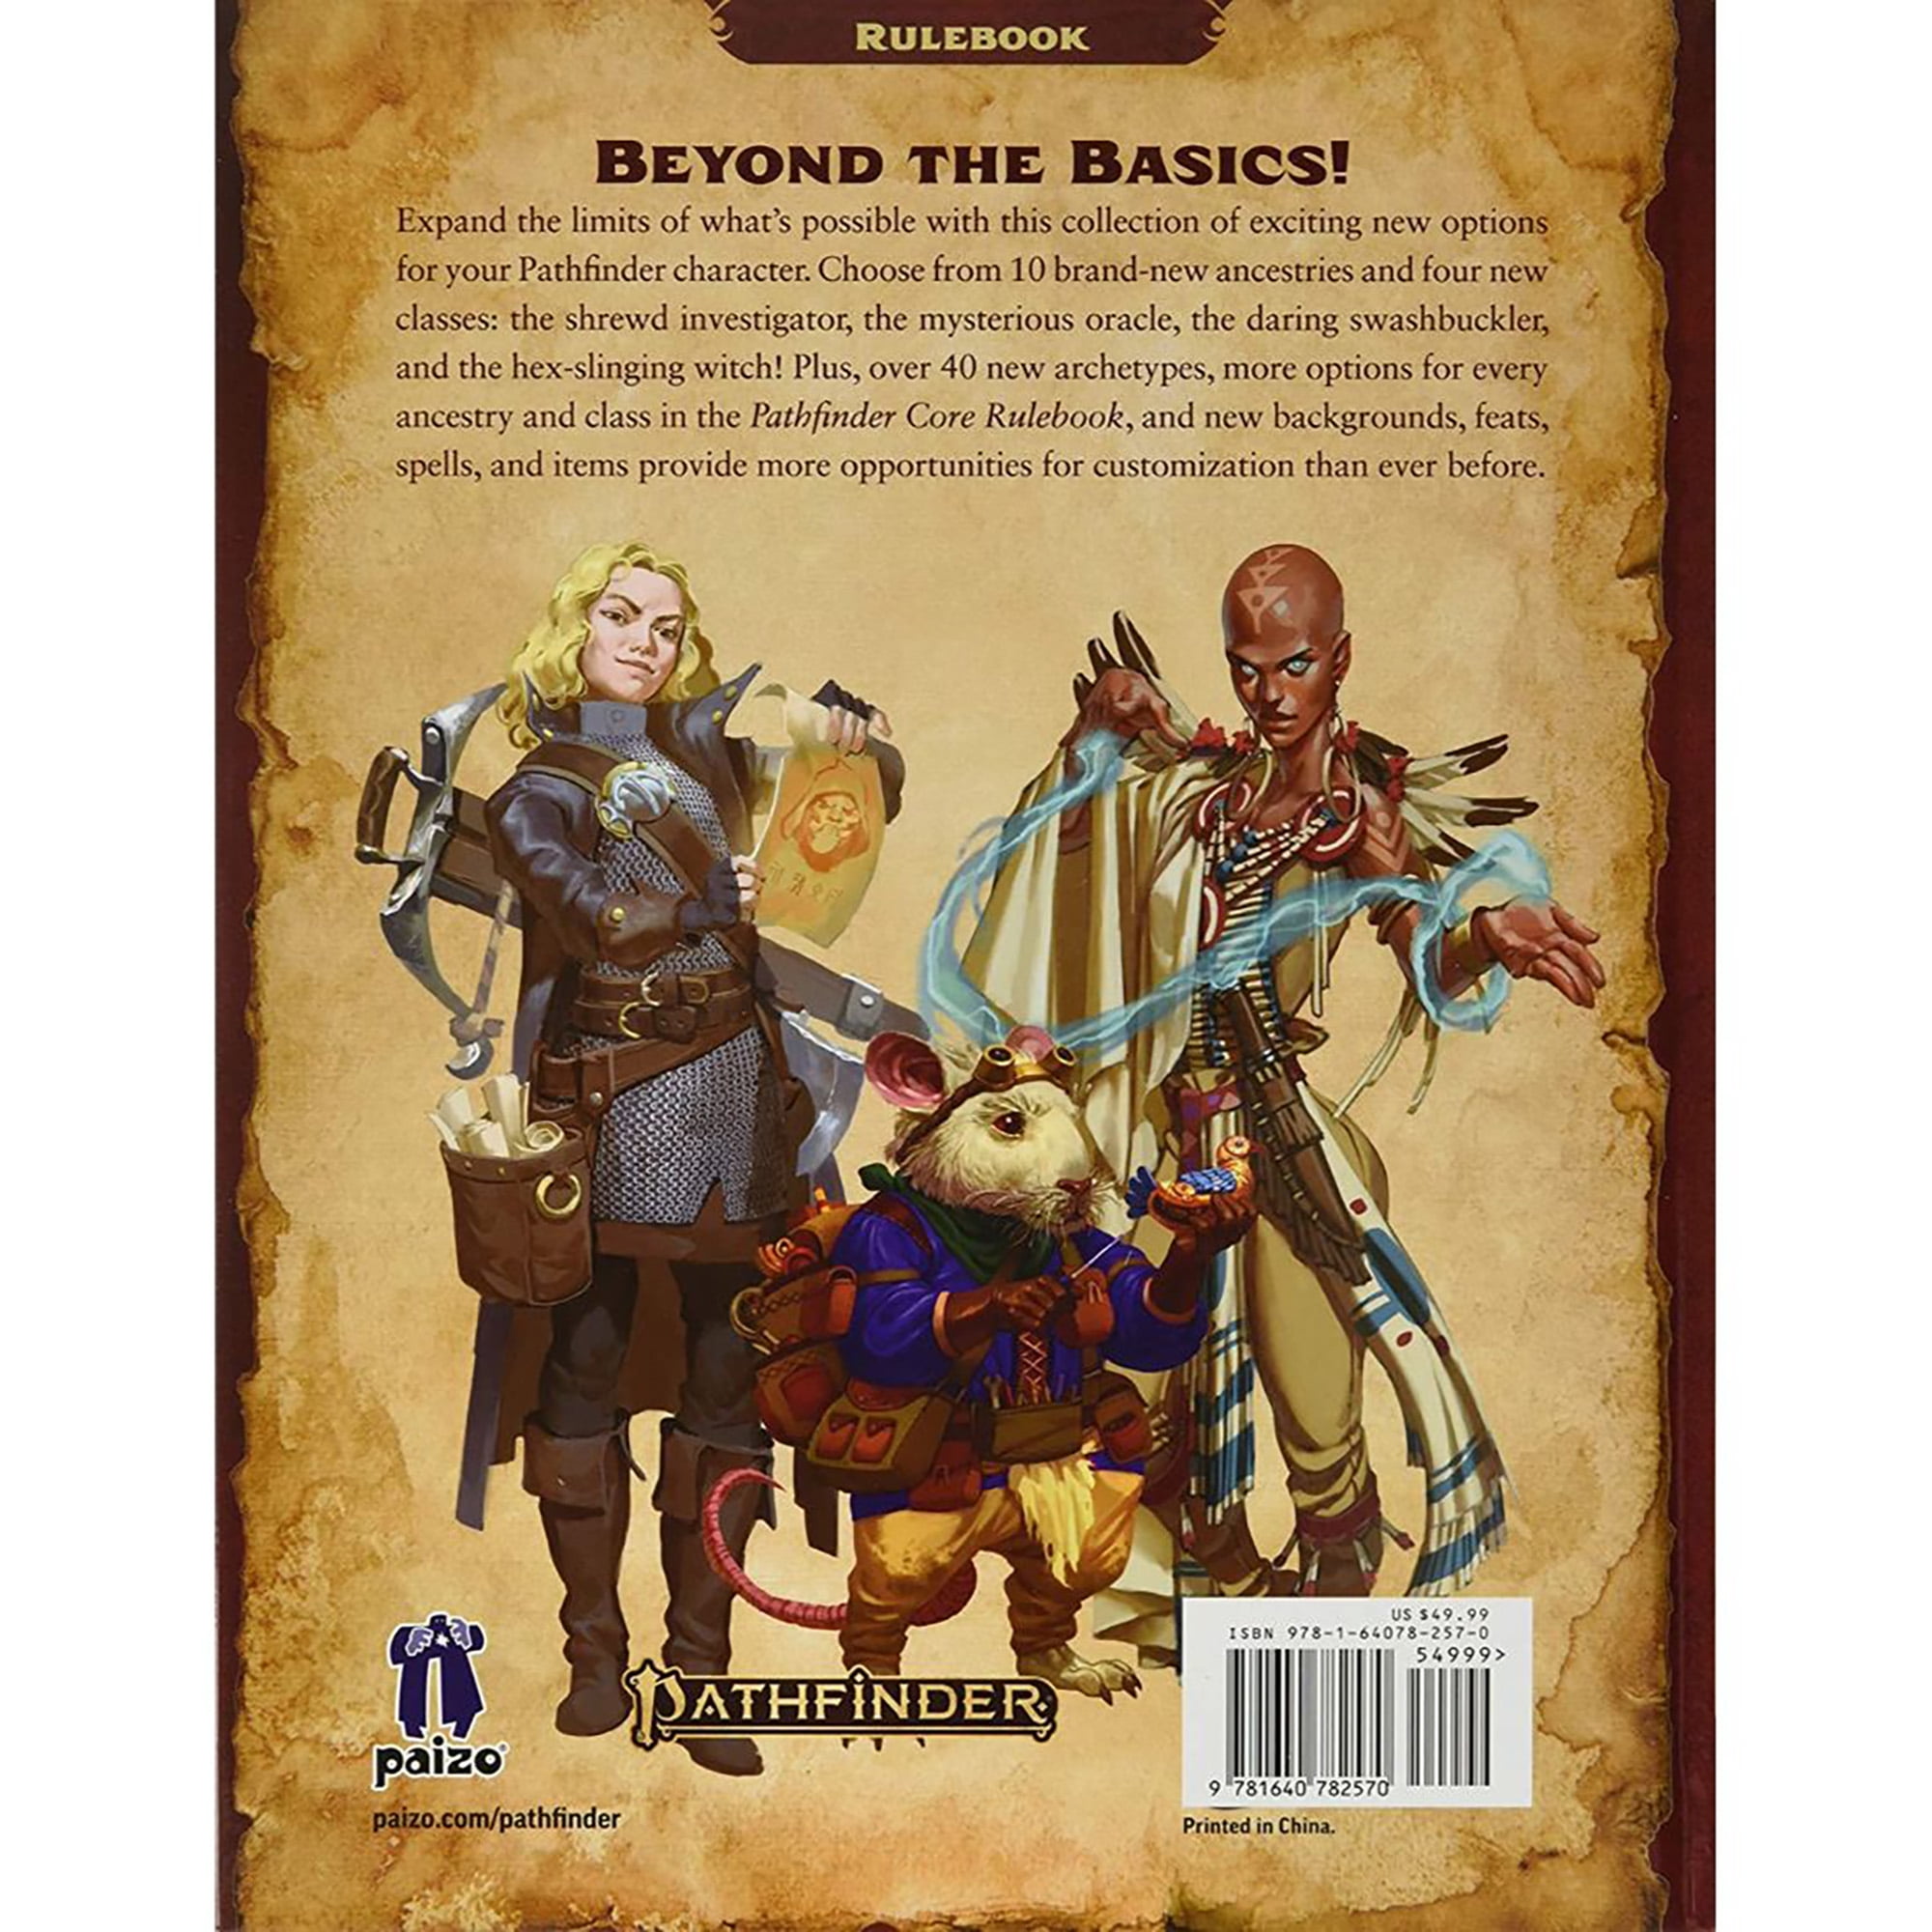 Review – Advanced Player's Guide (Pathfinder) – Strange Assembly